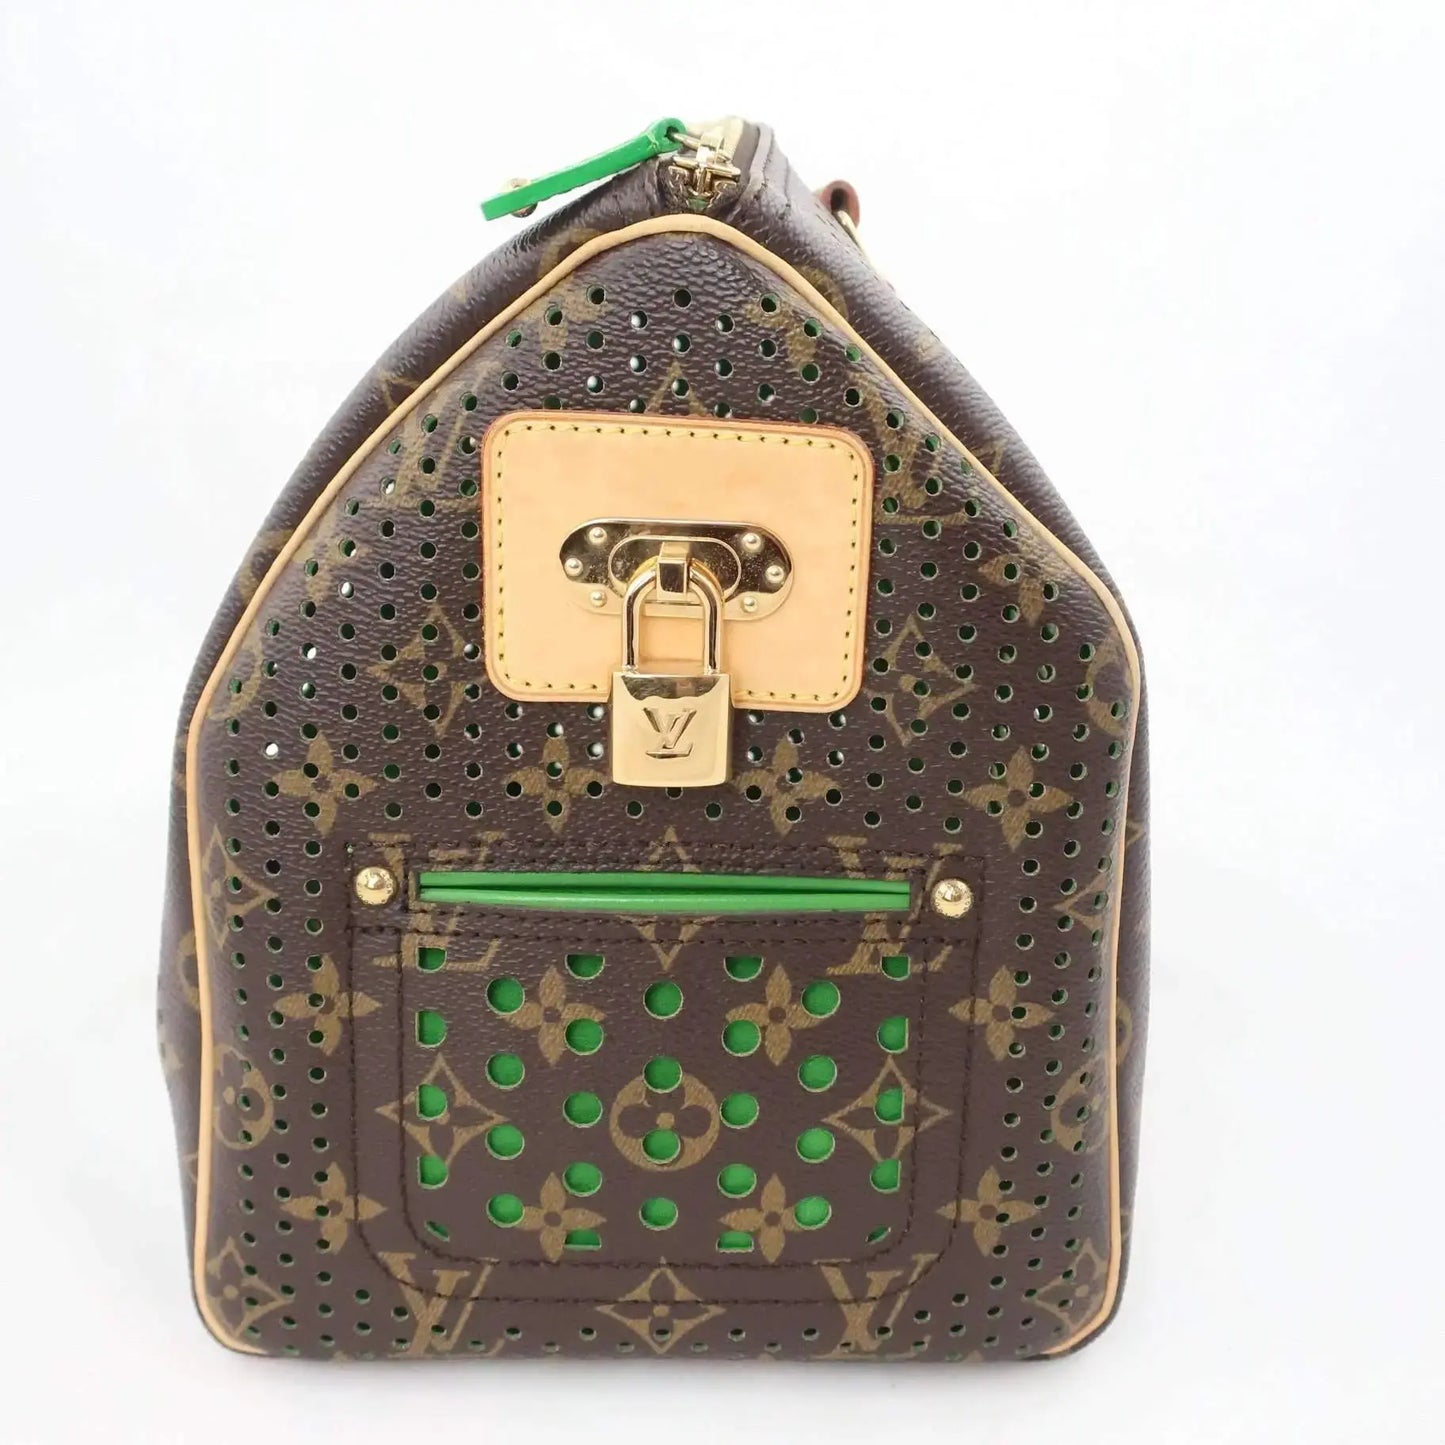 Louis Vuitton Limited Edition Green Perforated Speedy 30 Bag